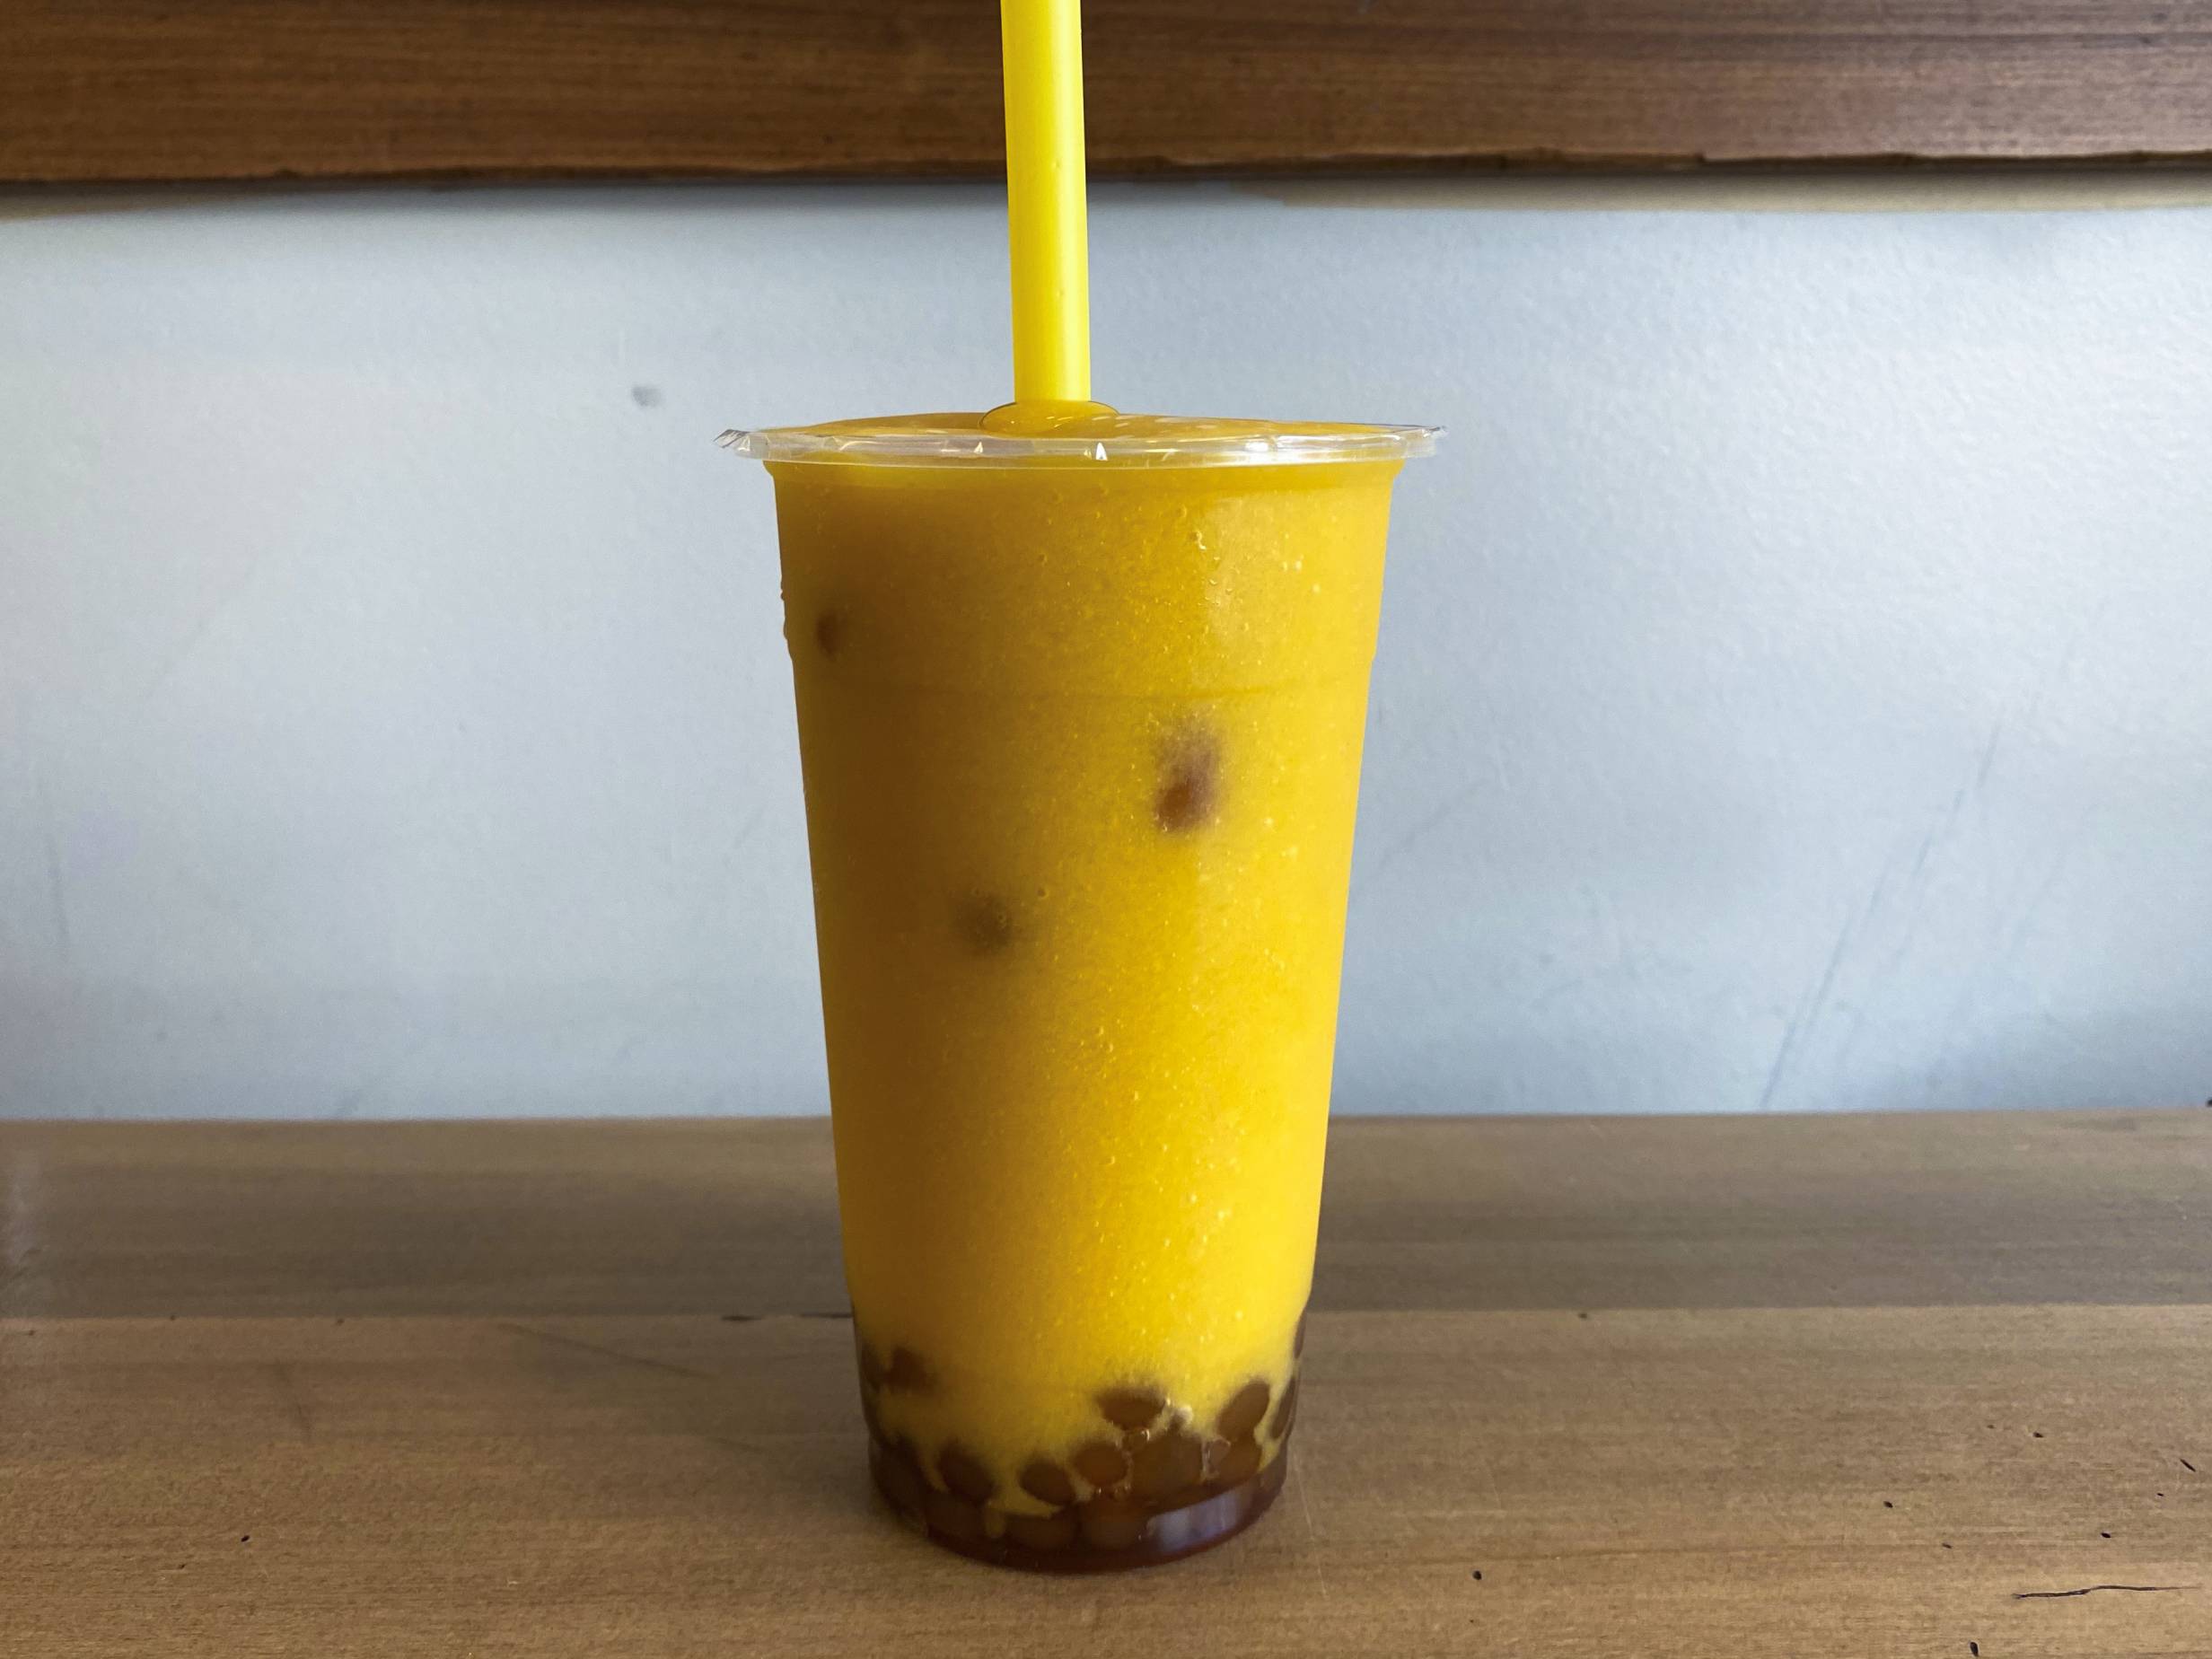 A mango smoothie from Latea with purple boba on the bottom sits on a wooden table. Photo by Chantal Vaca.